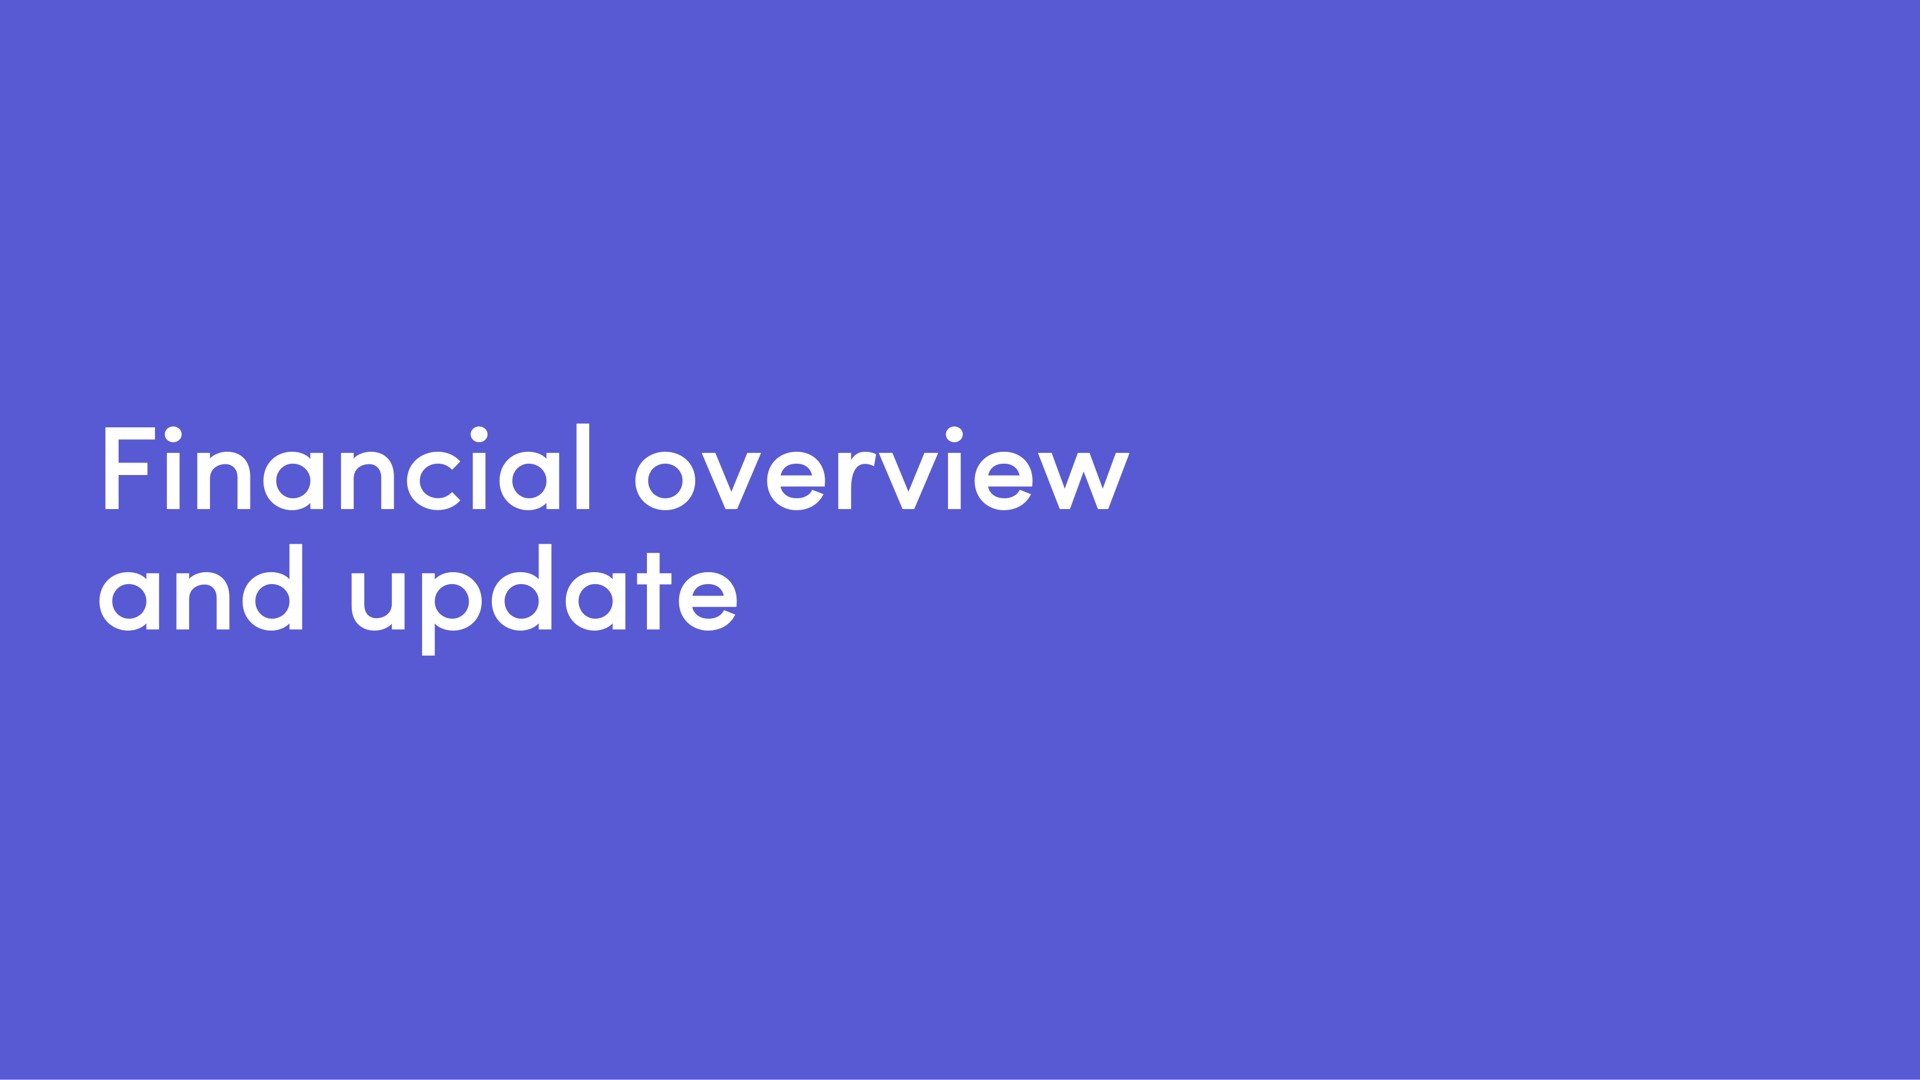 financial overview and update | monday.com